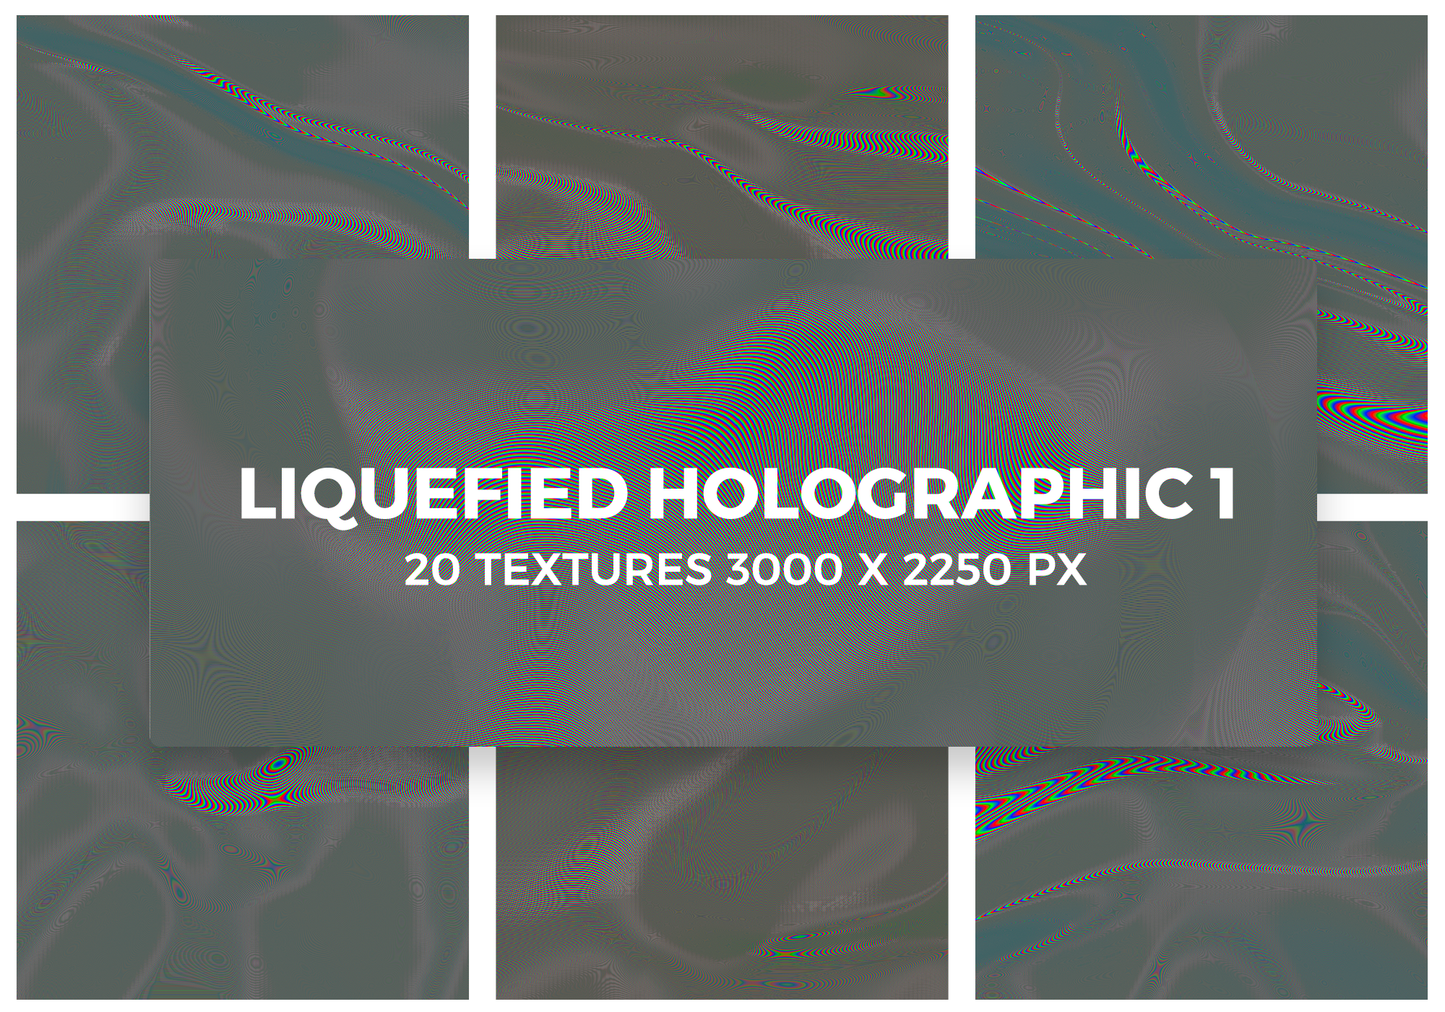 Liquefied Holographic 1